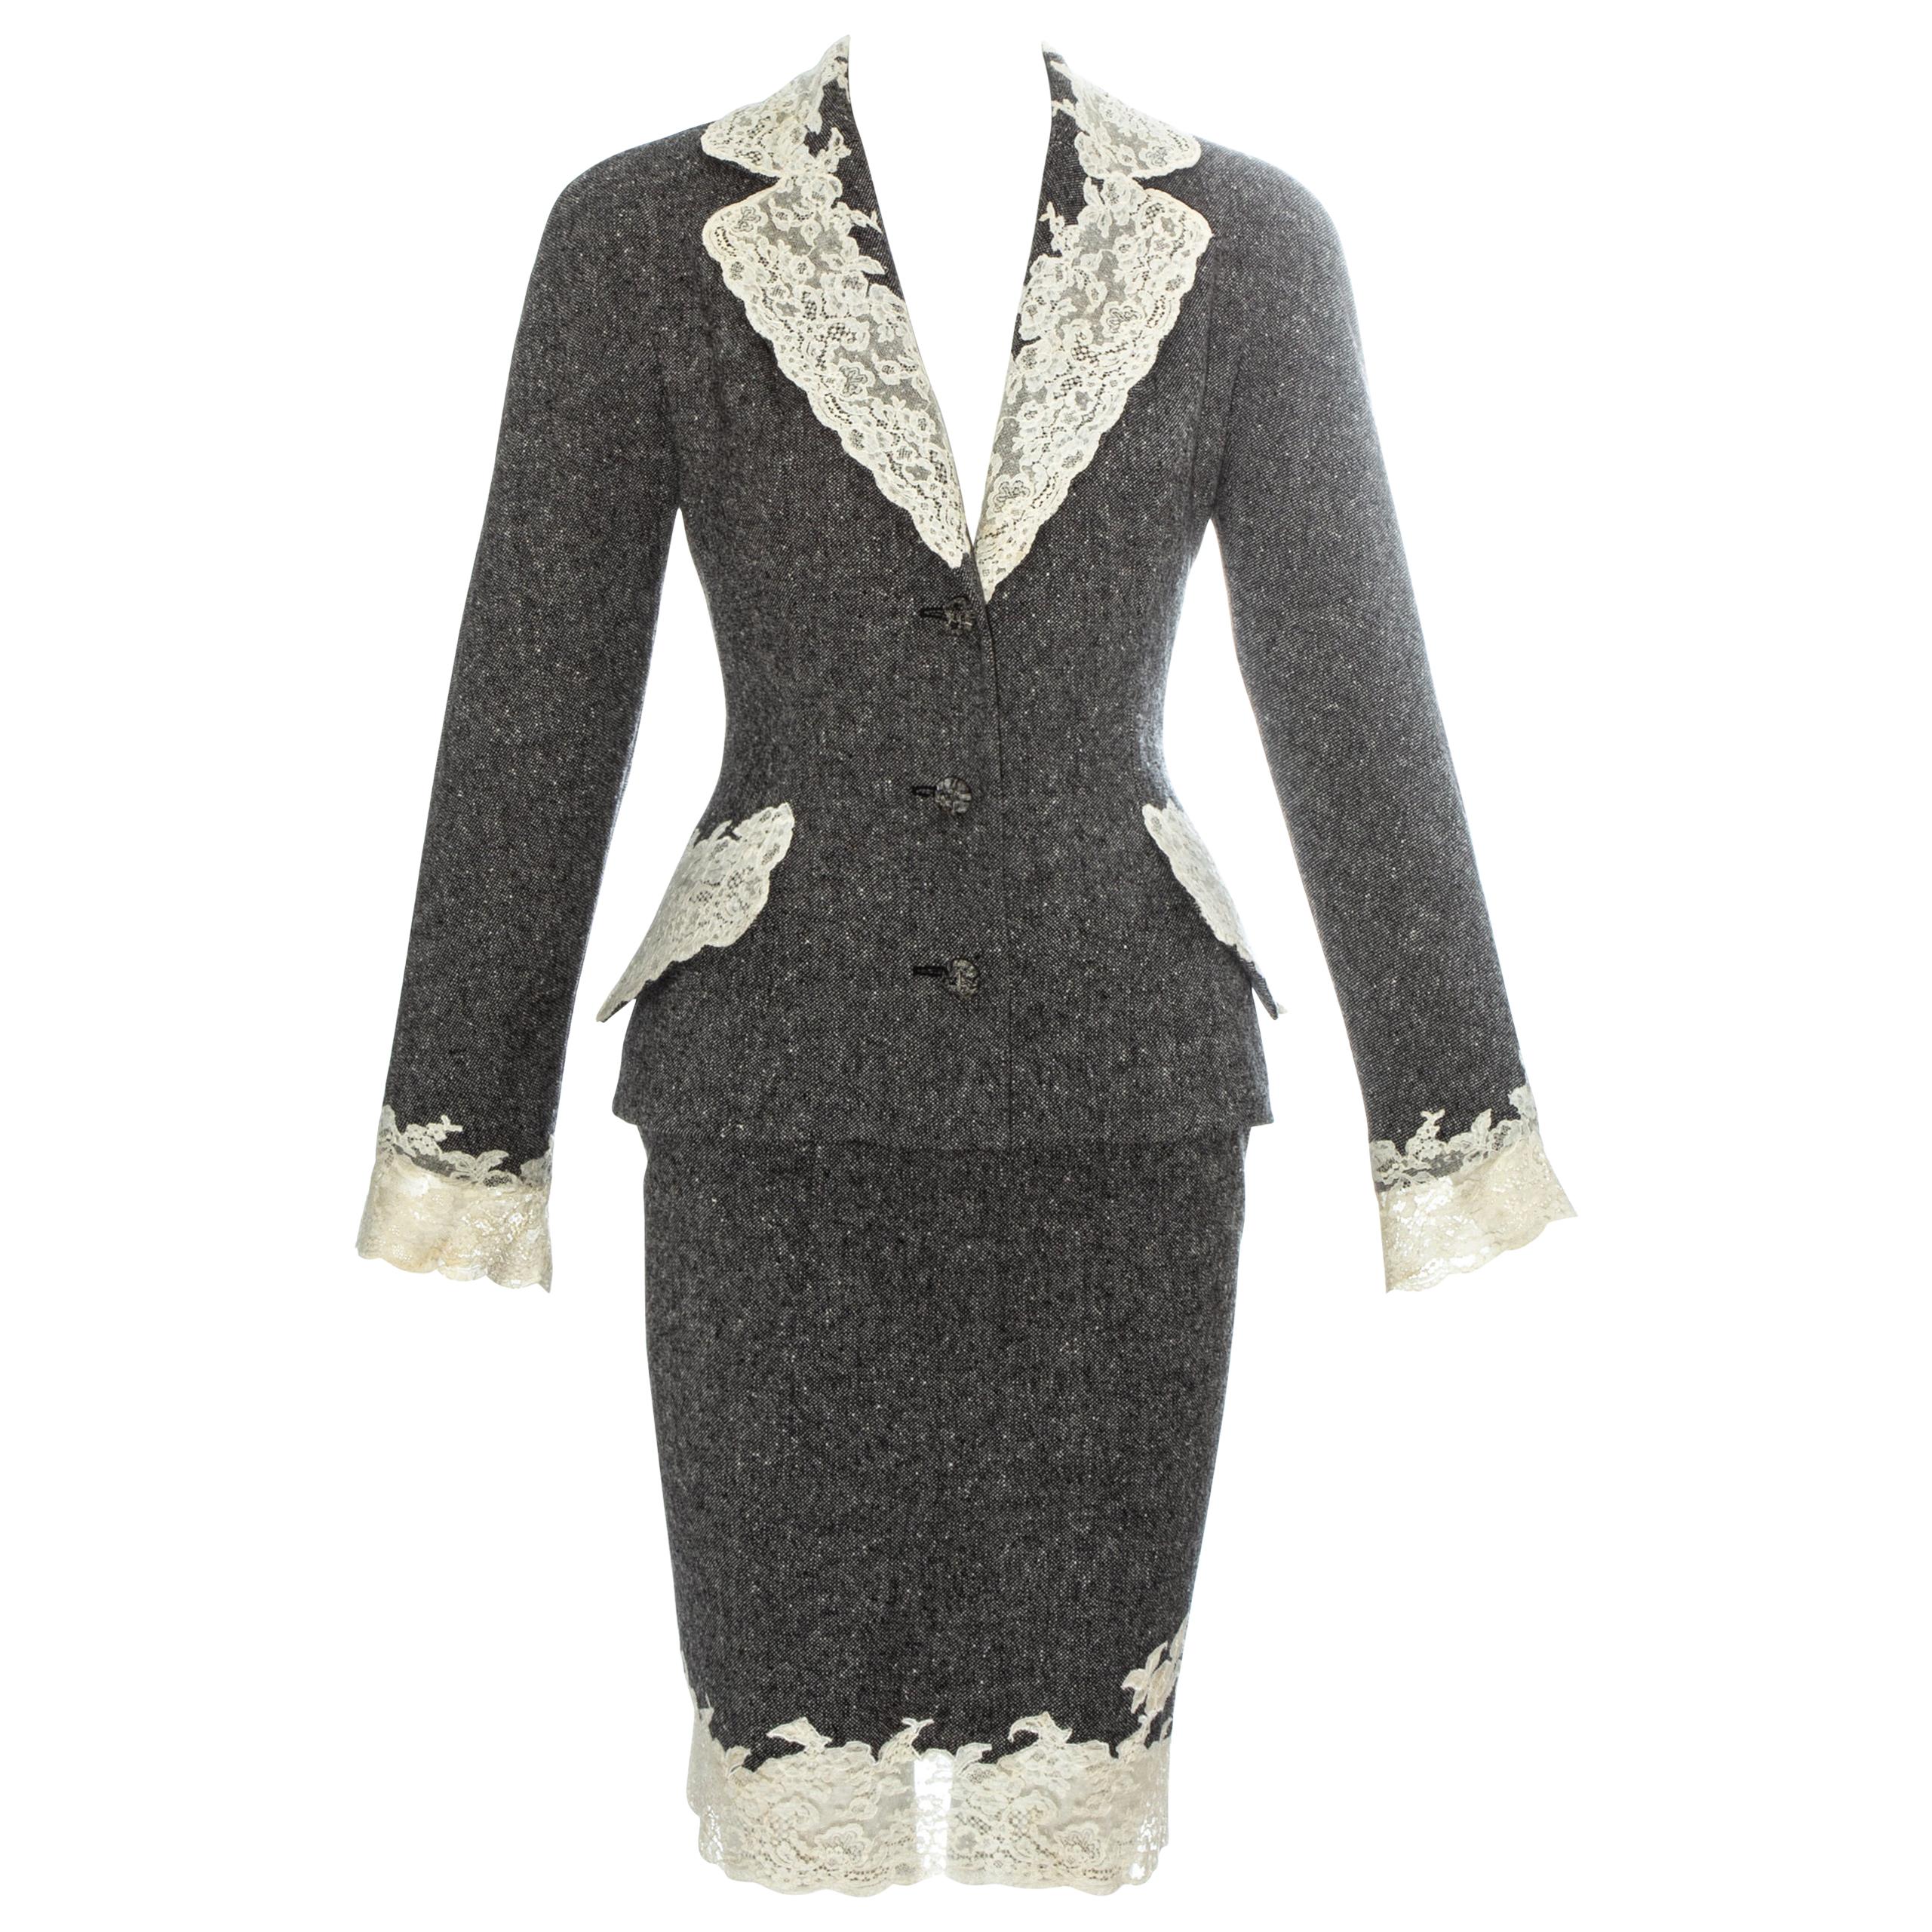 Christian Dior grey Donegal tweed skirt suit edged in white Calais lace, fw 1998